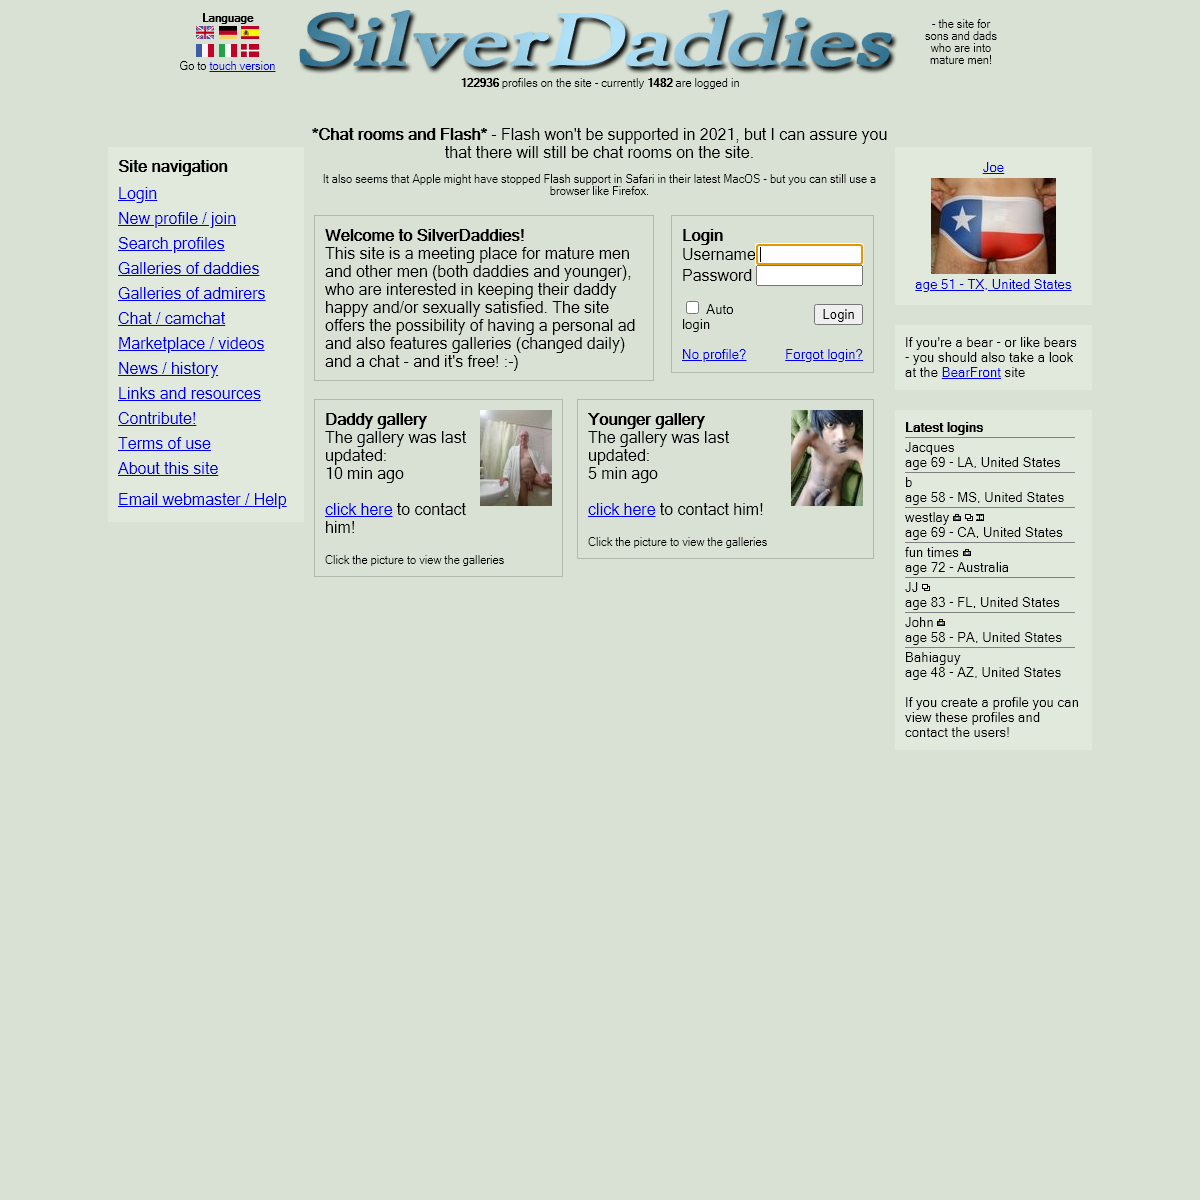 A complete backup of silverdaddies.com